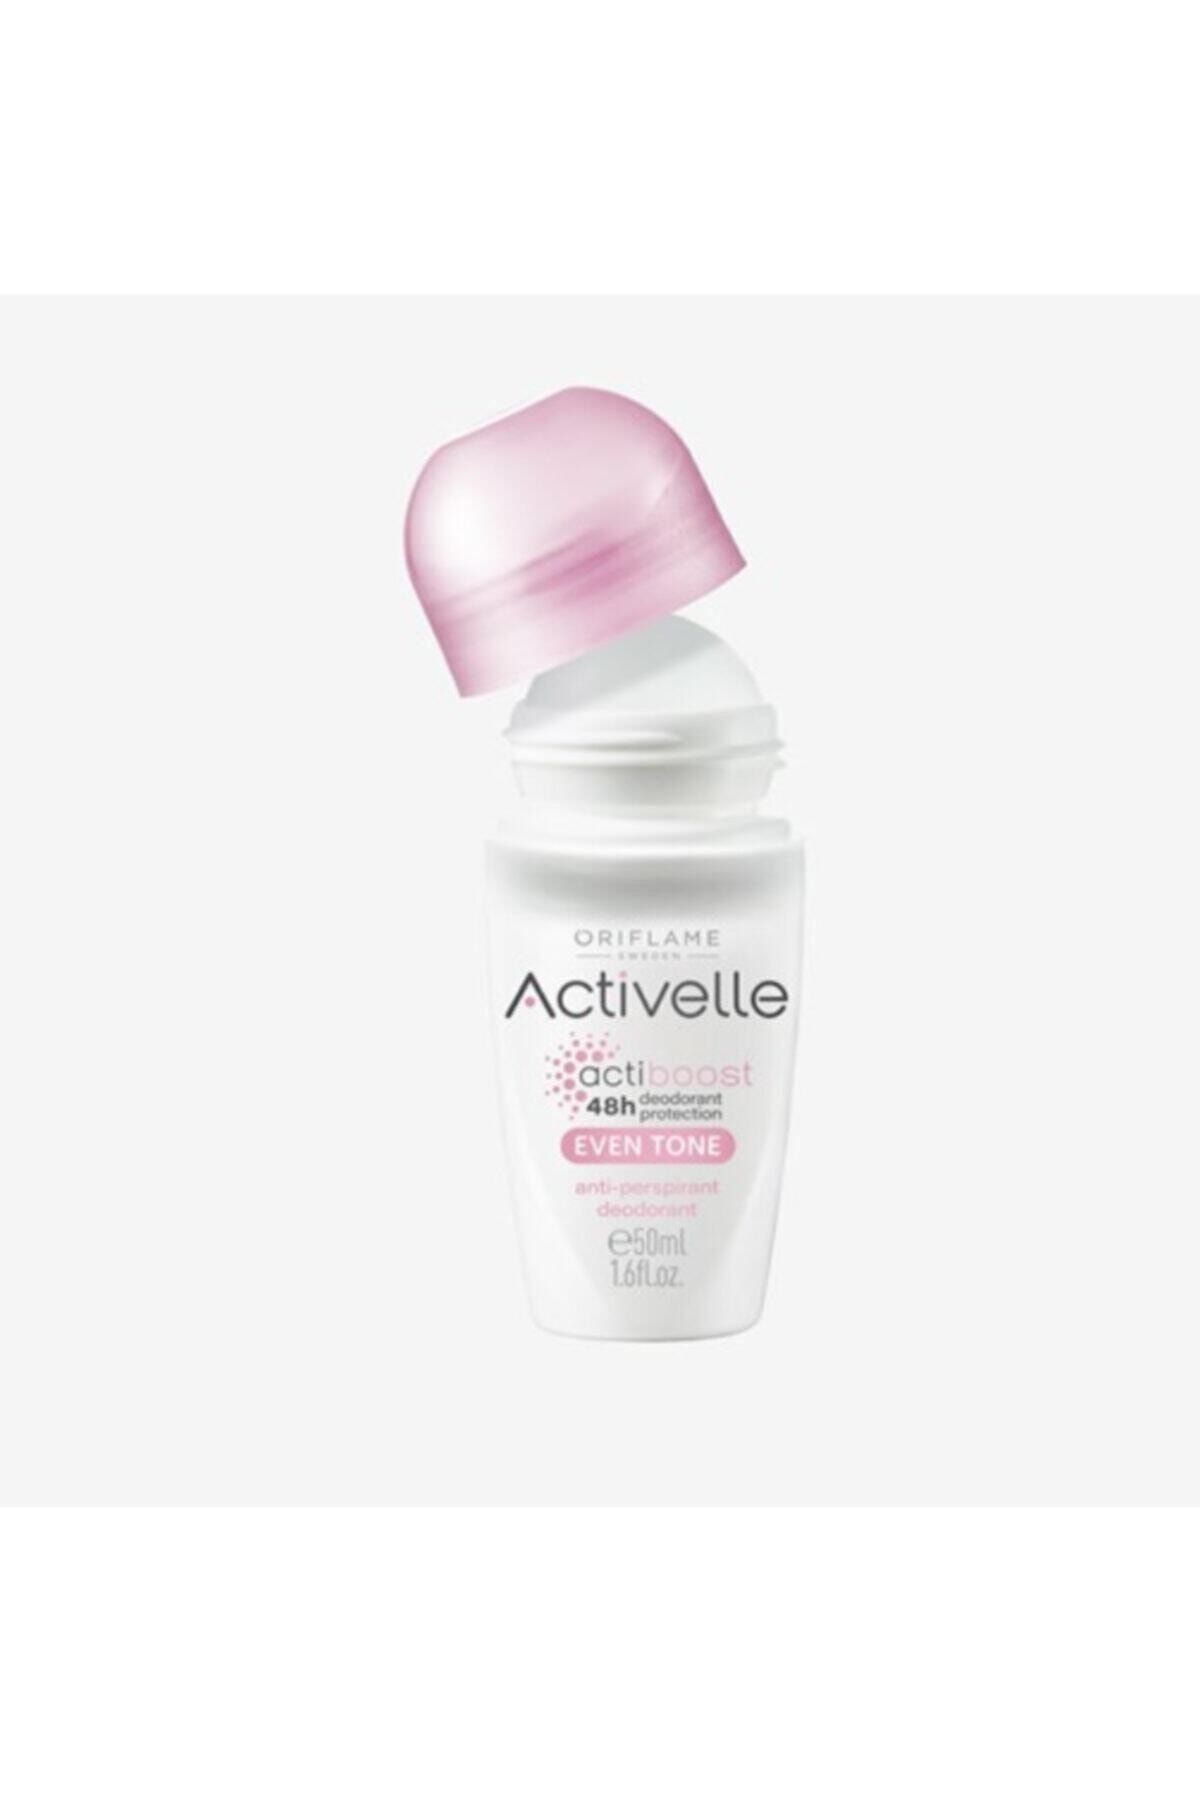 Oriflame Activelle Even Tone Anti-perspirant Roll-on